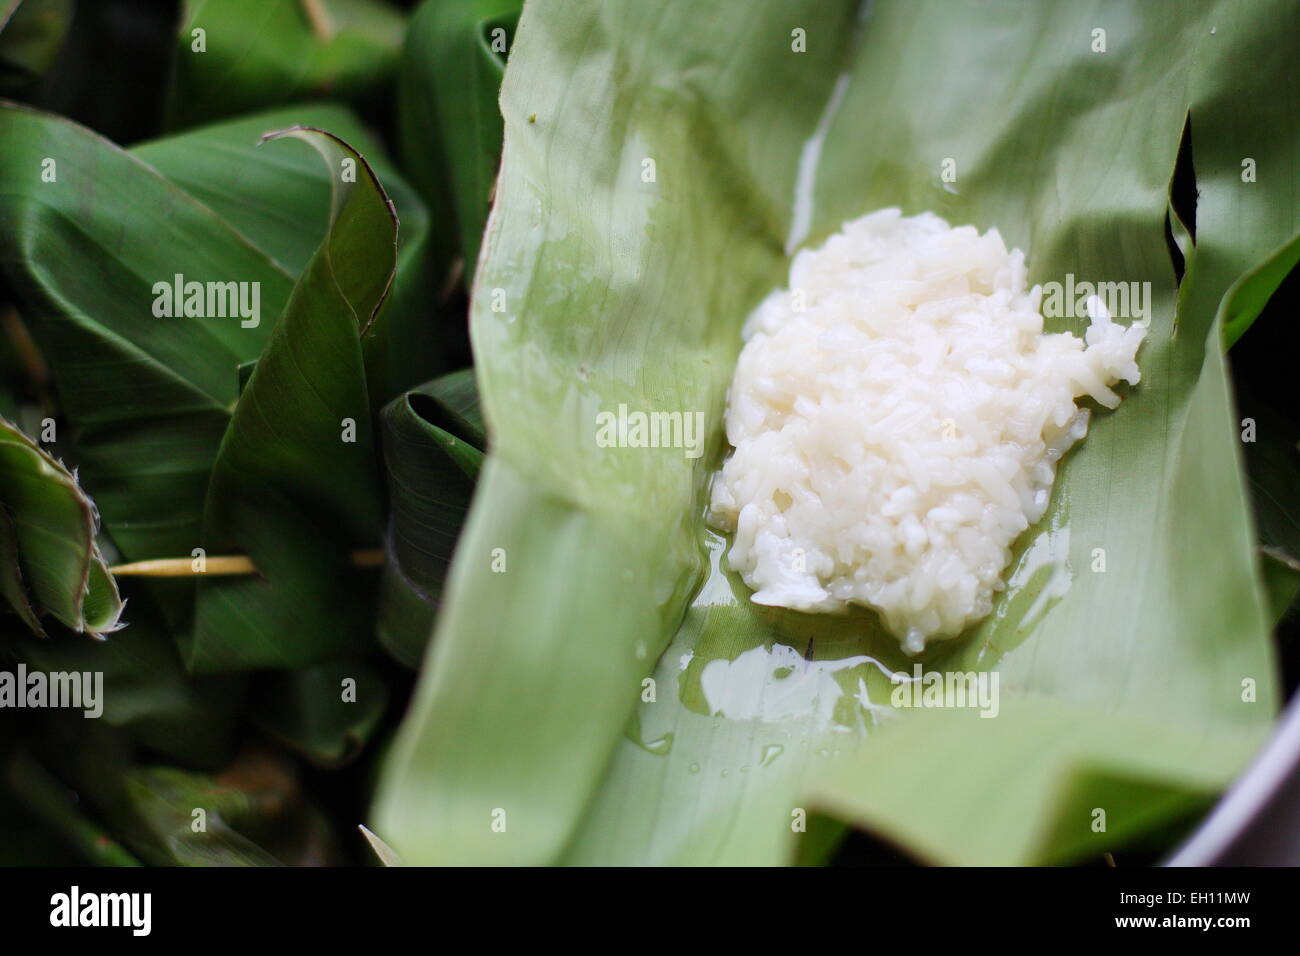 Fermented  white glutinous rice wrapped in banana leaves Stock Photo